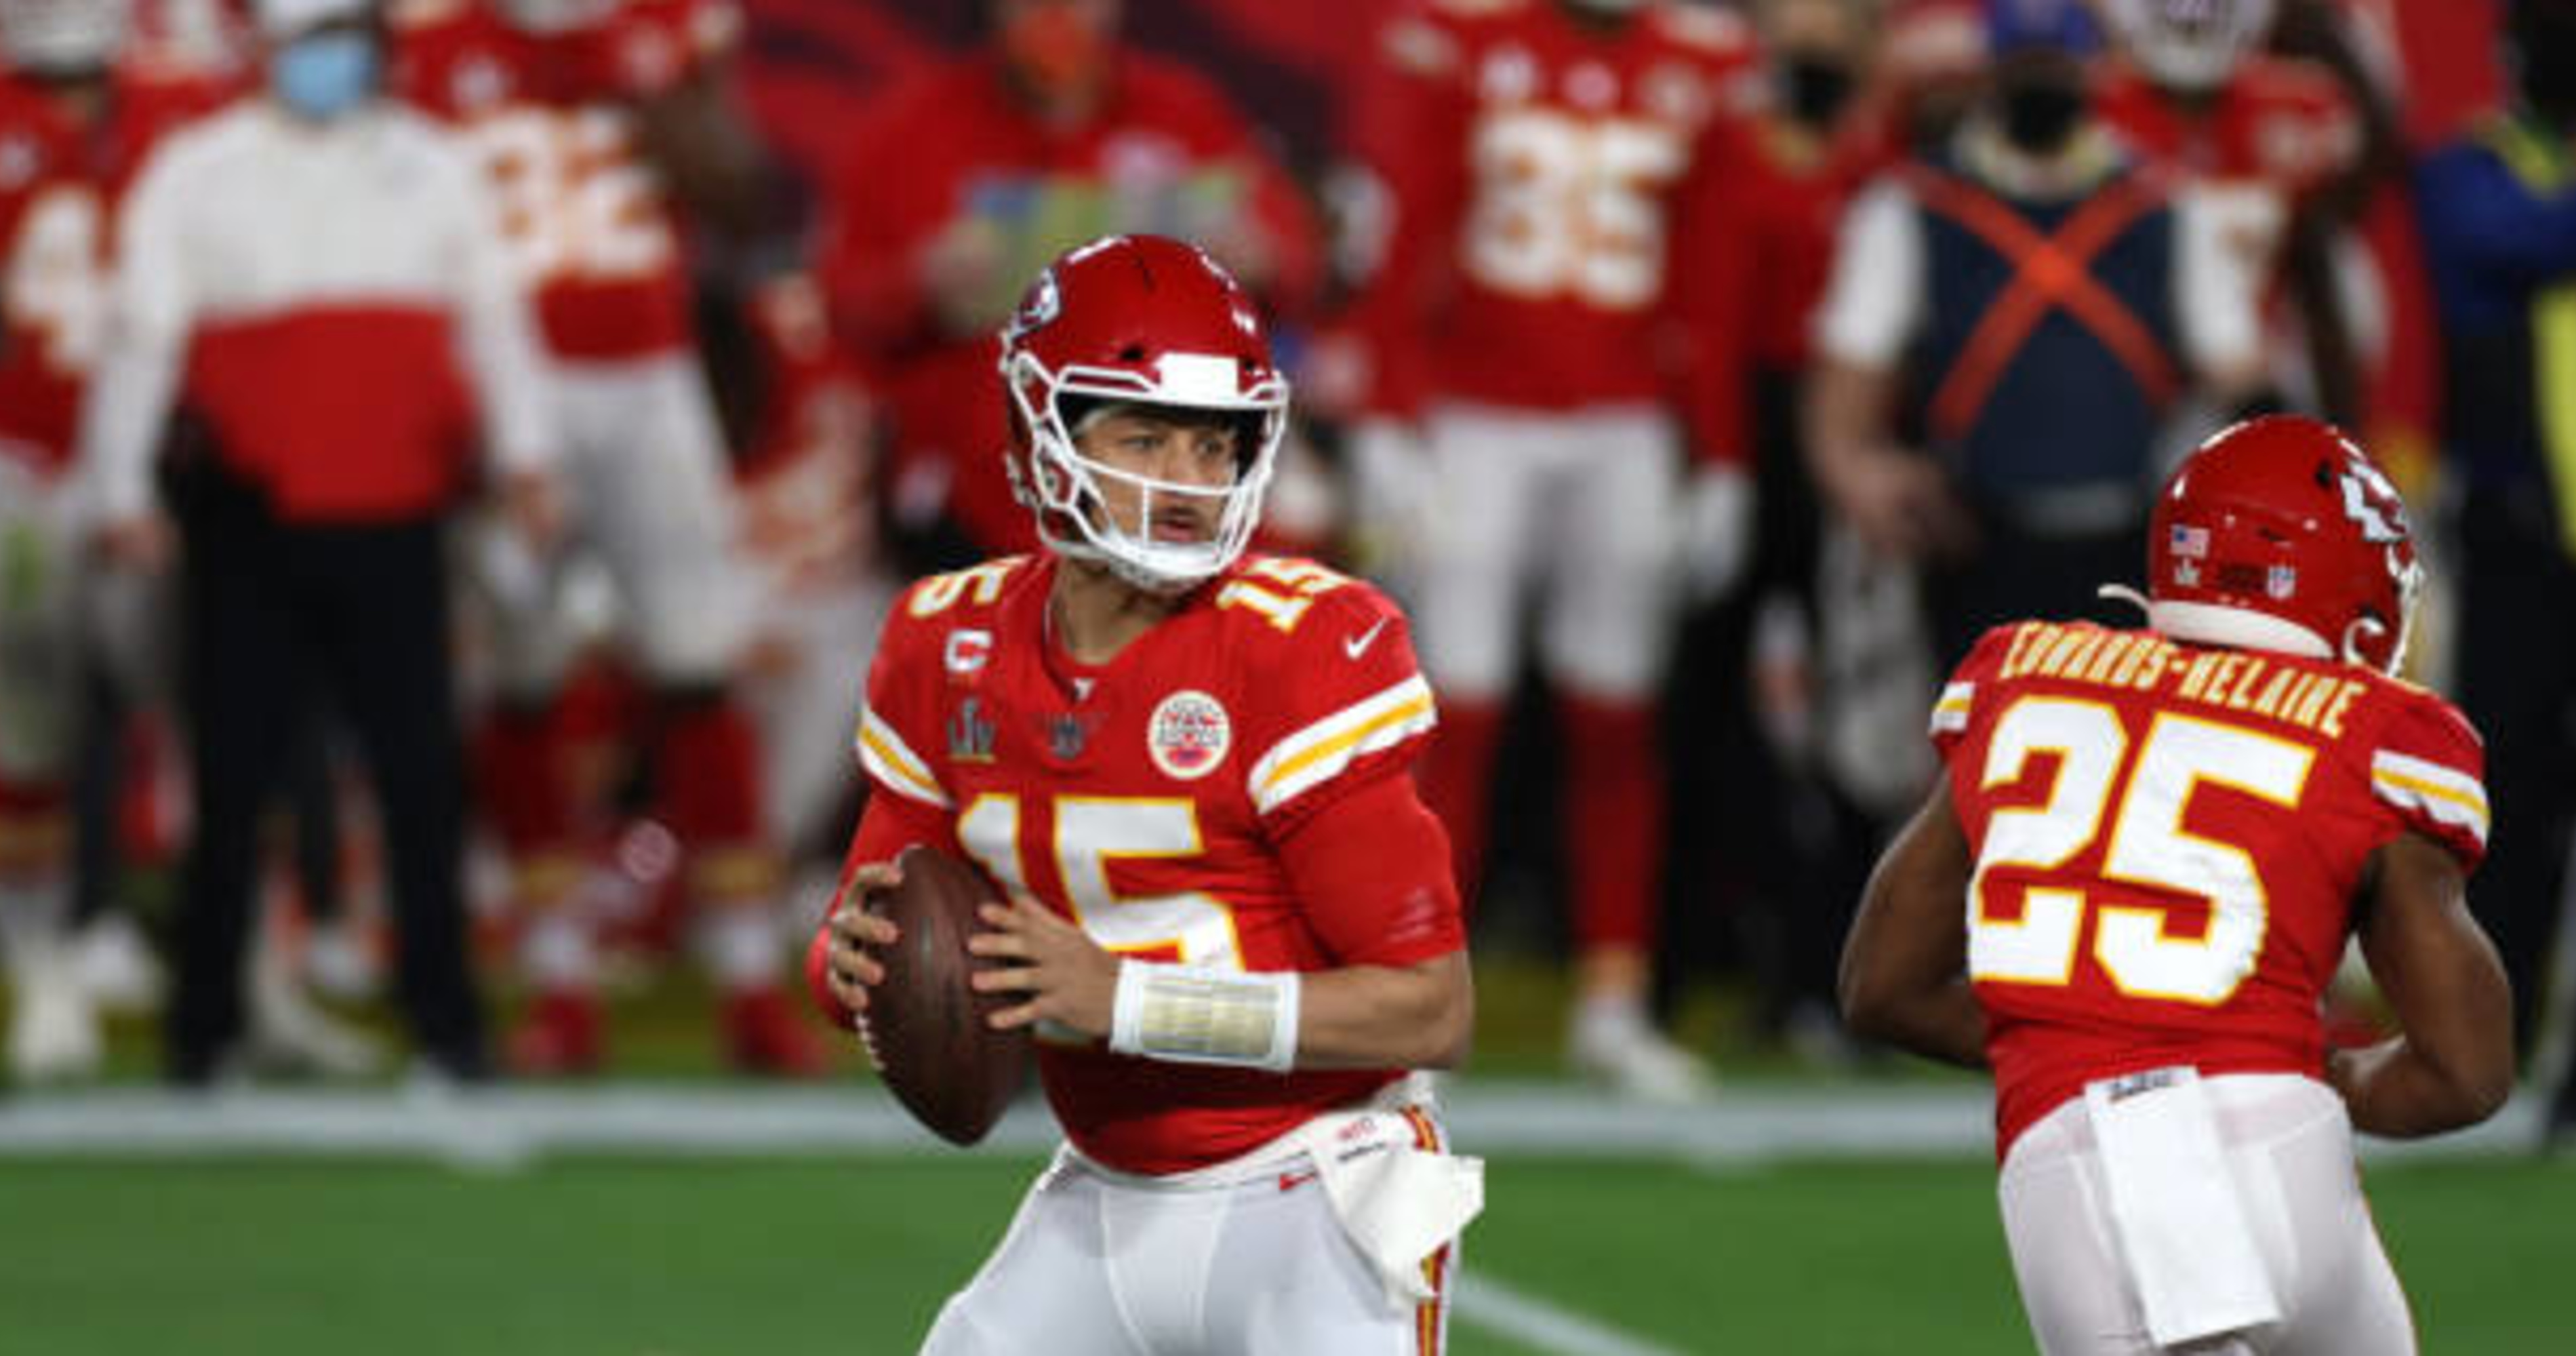 Do looks matter in football? Study says they help Kansas City